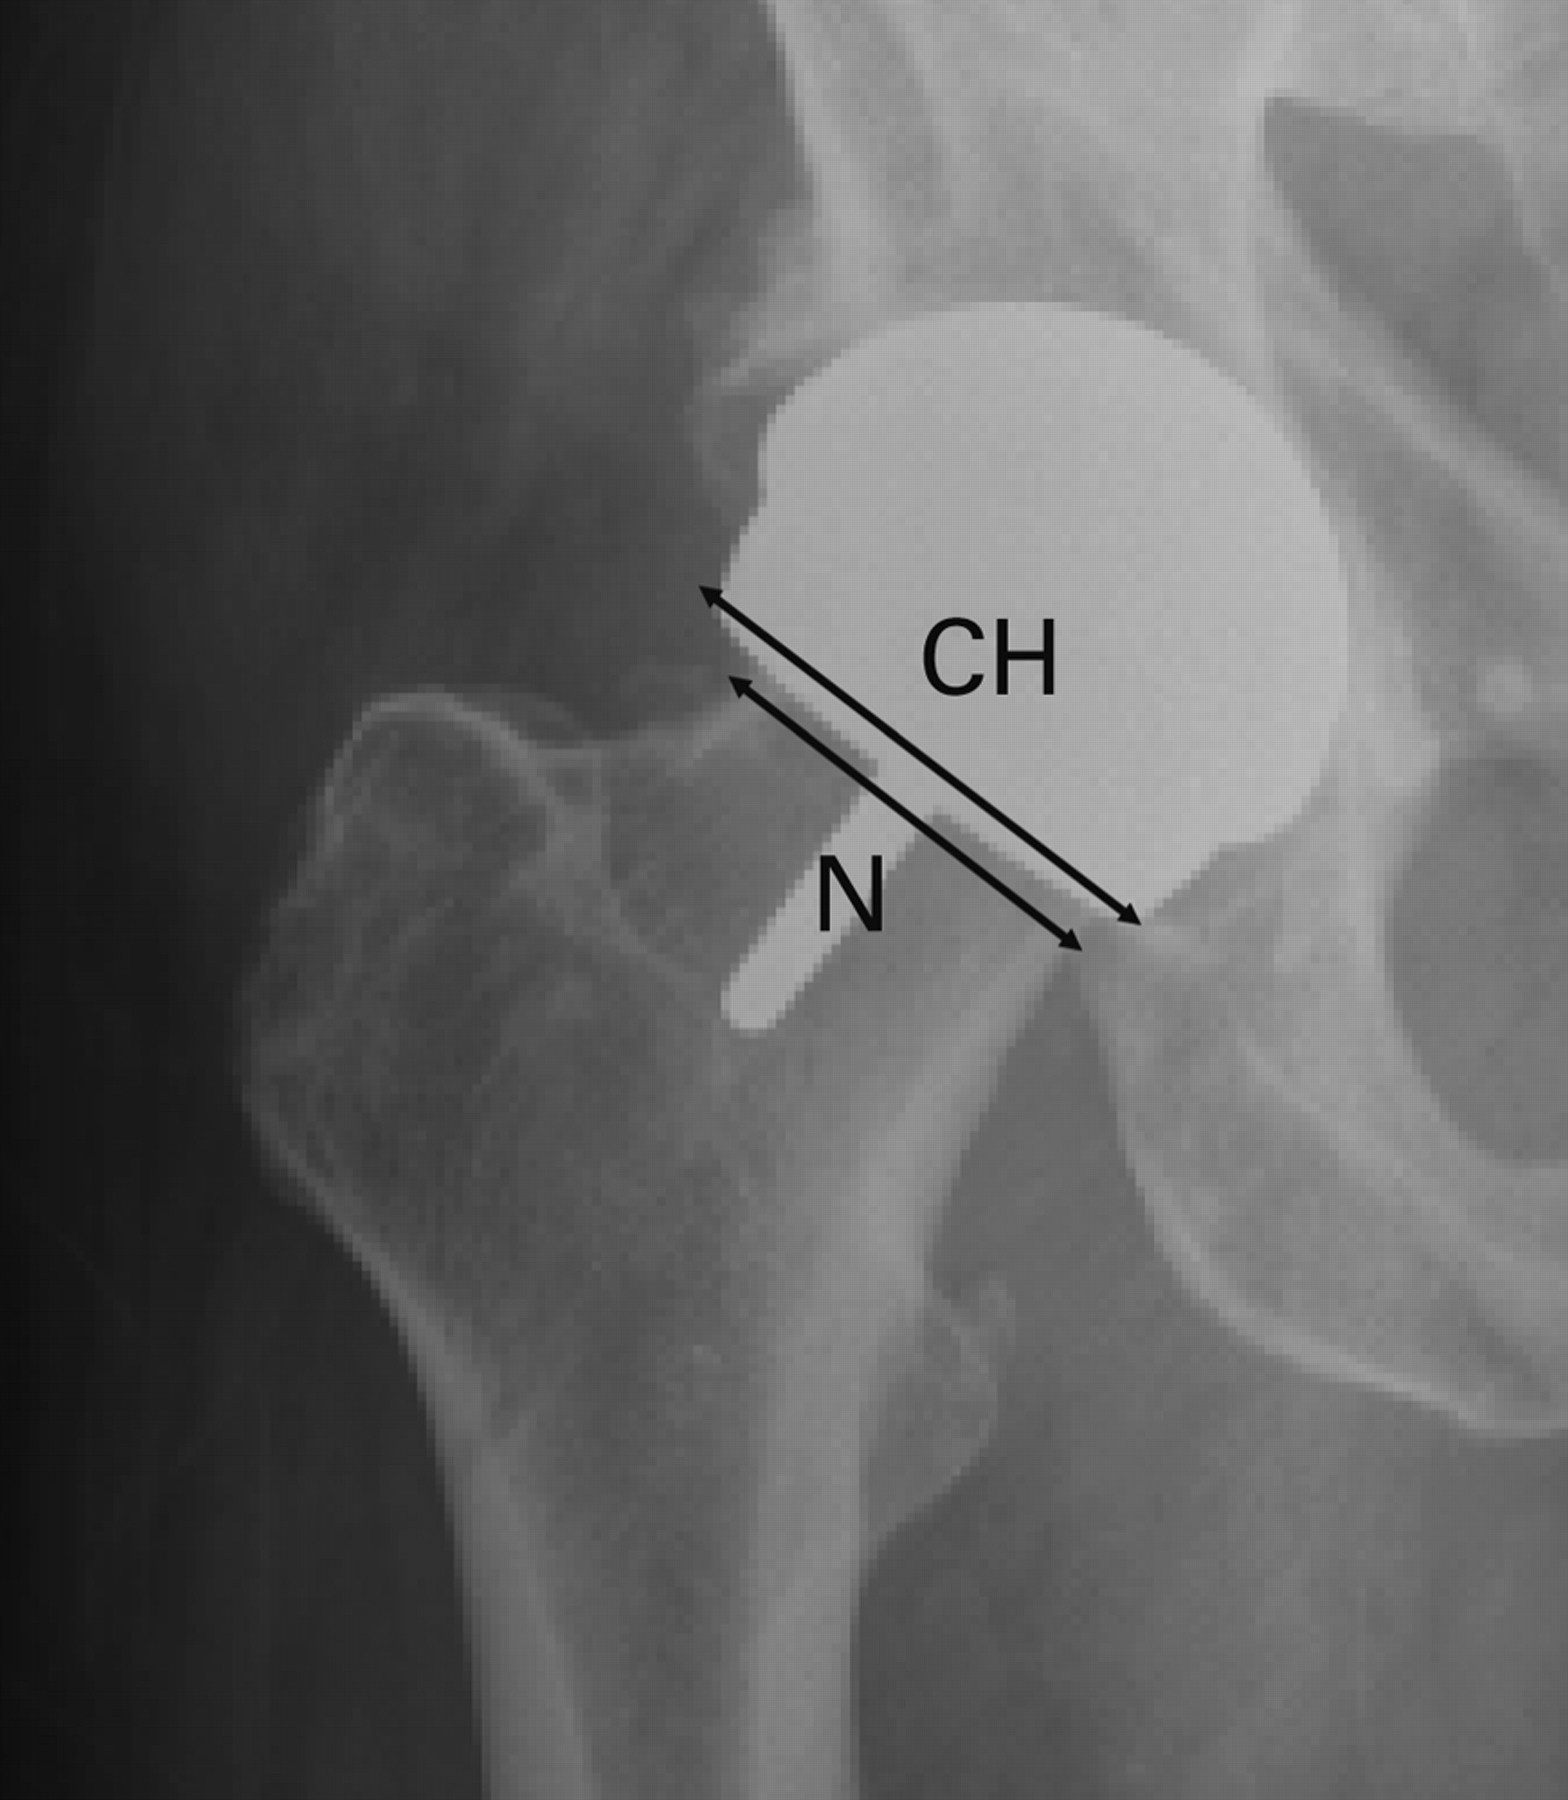 Fig. 3  
            Radiograph showing the measurements taken from a standardised AP radiograph of the pelvis to calculate the component head (CH): neck (N) ratio.
          